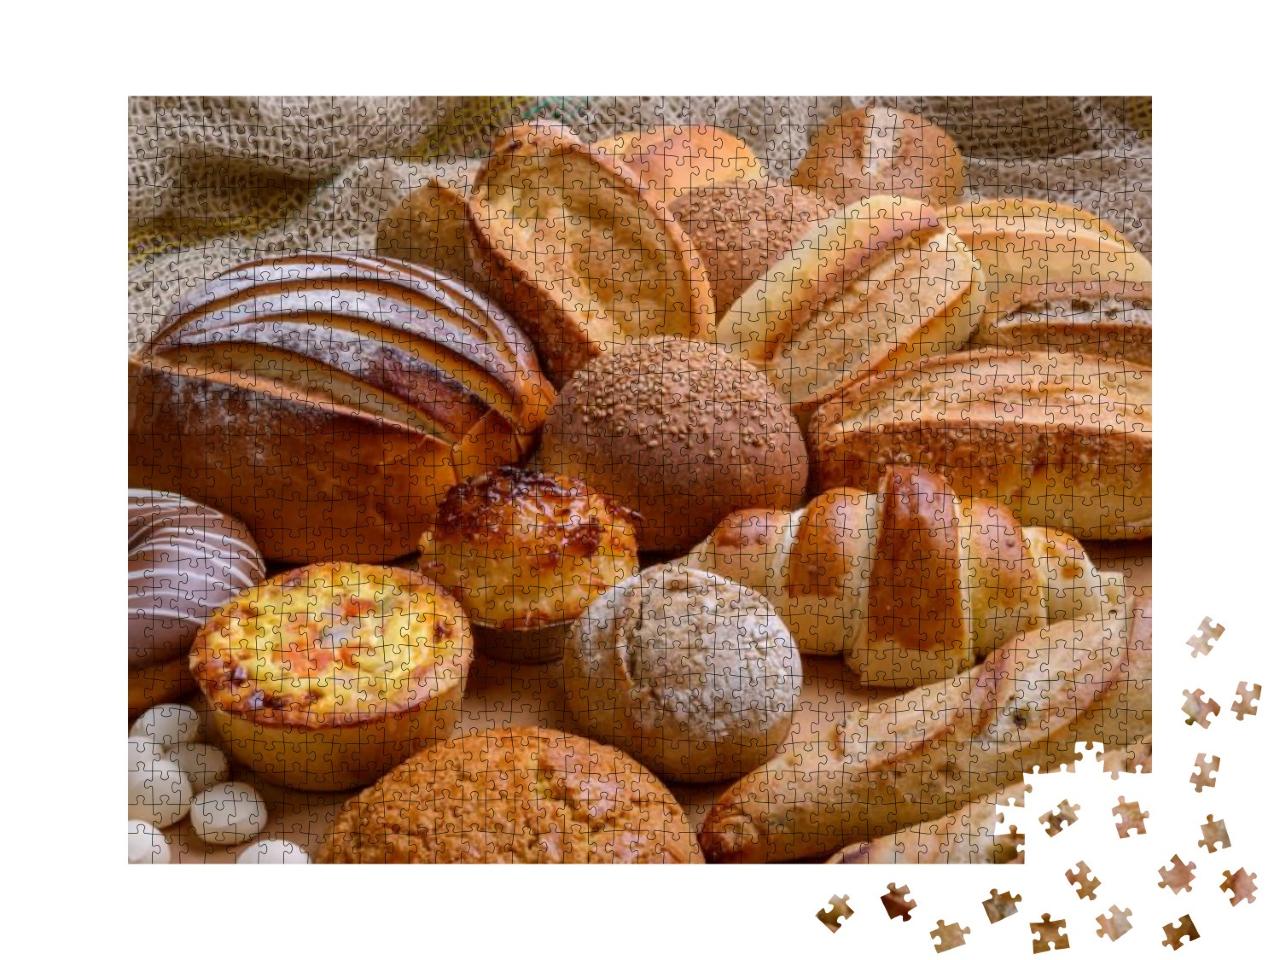 Breads. Assorted Types of Brazilian Breads. Bakery Produc... Jigsaw Puzzle with 1000 pieces